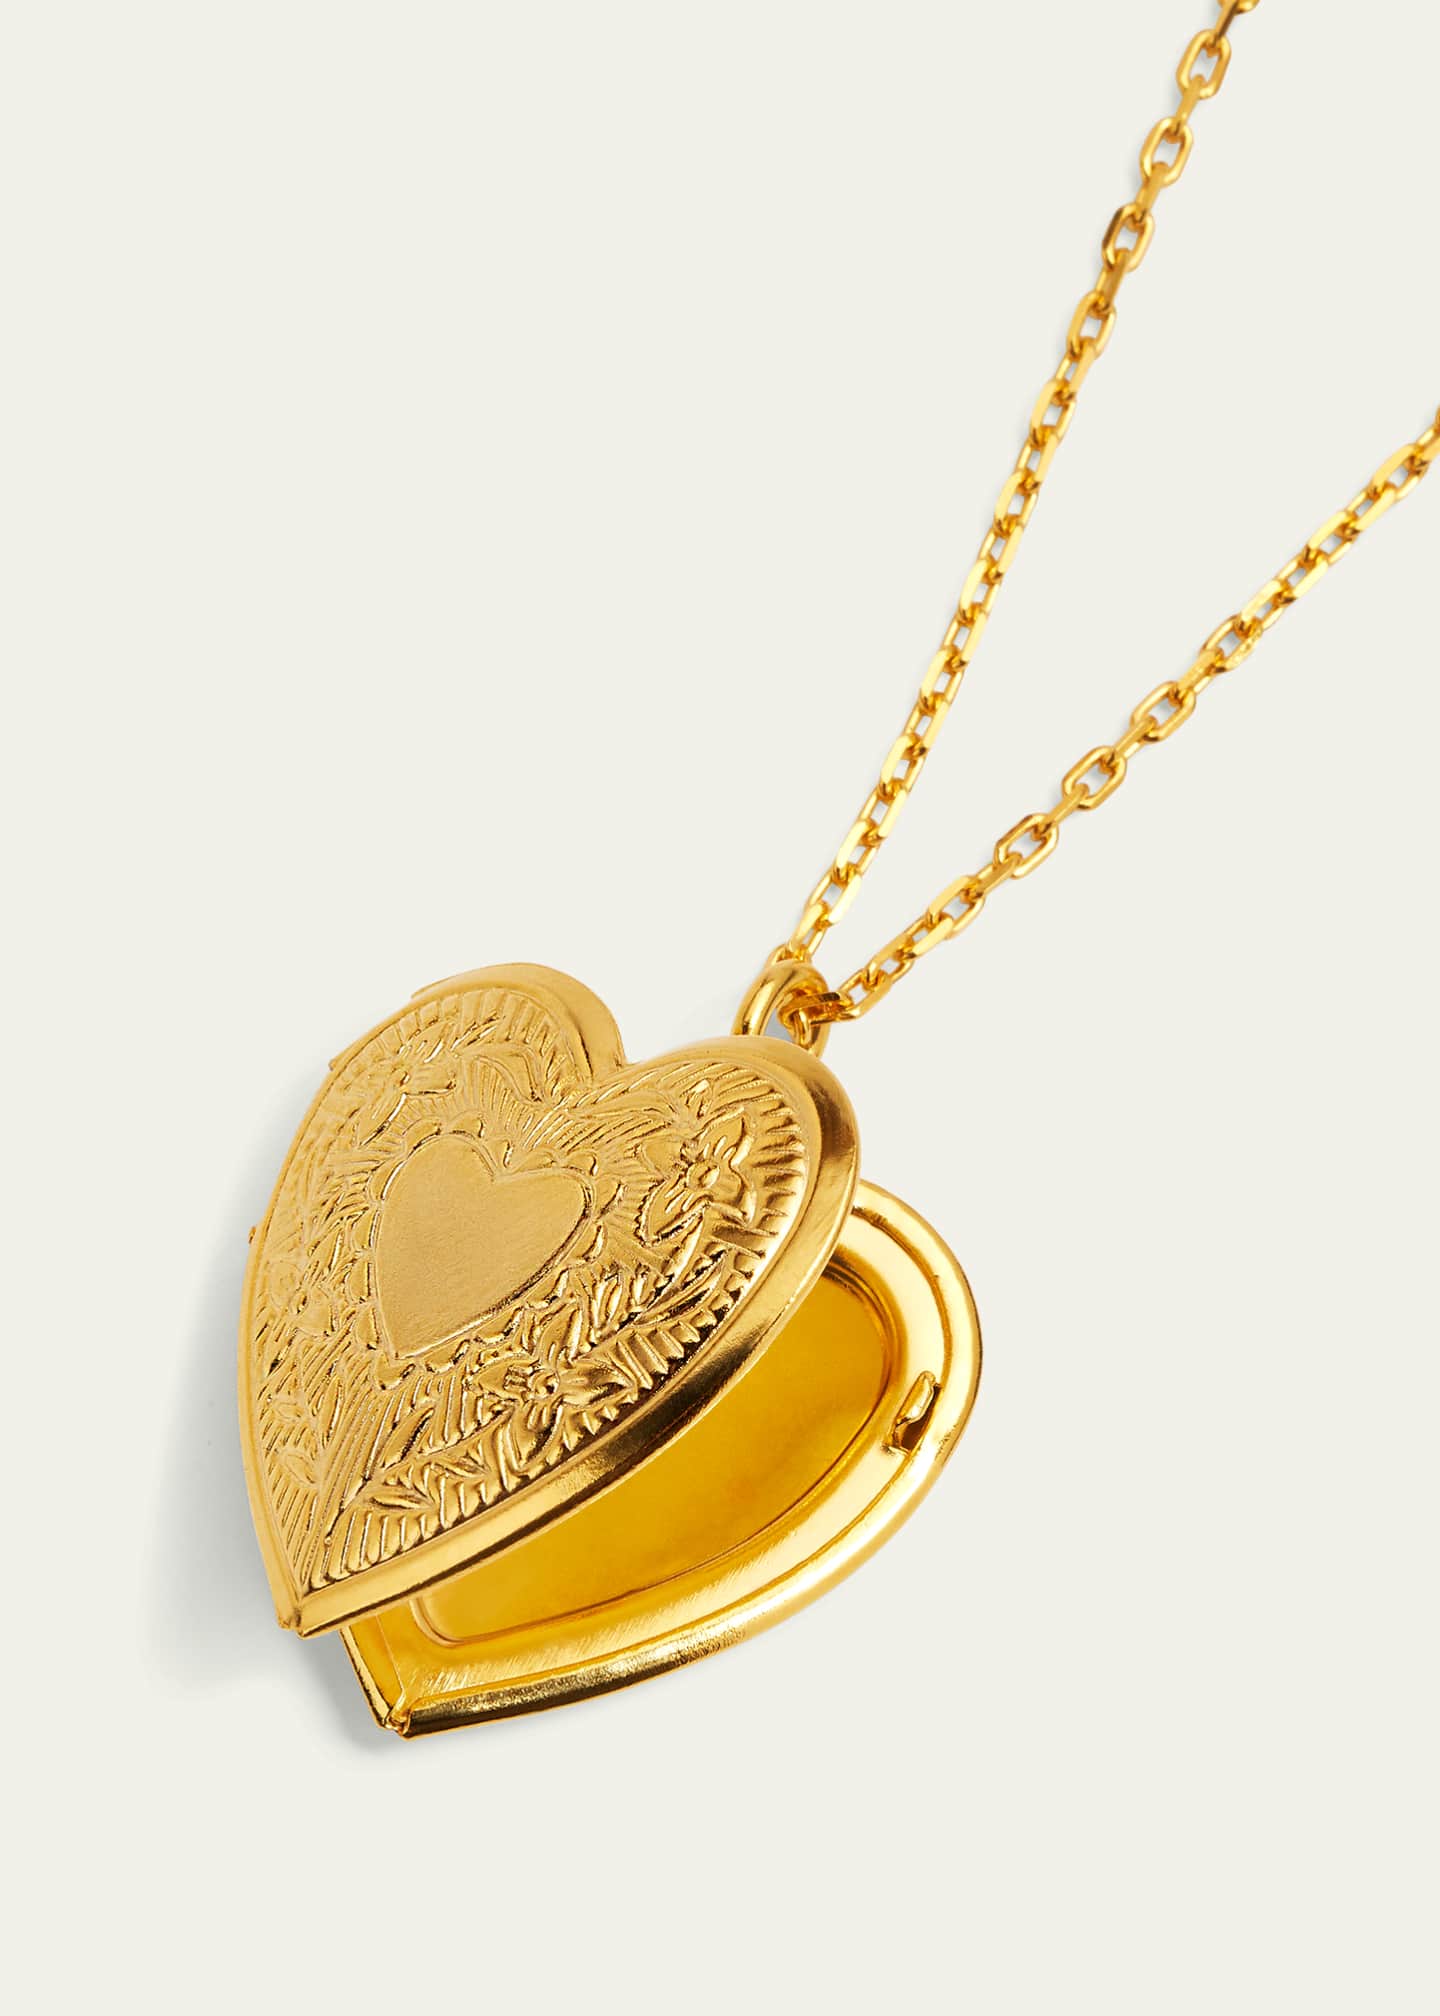 Heart Lock Necklace in 24K Gold Plating by oNecklace